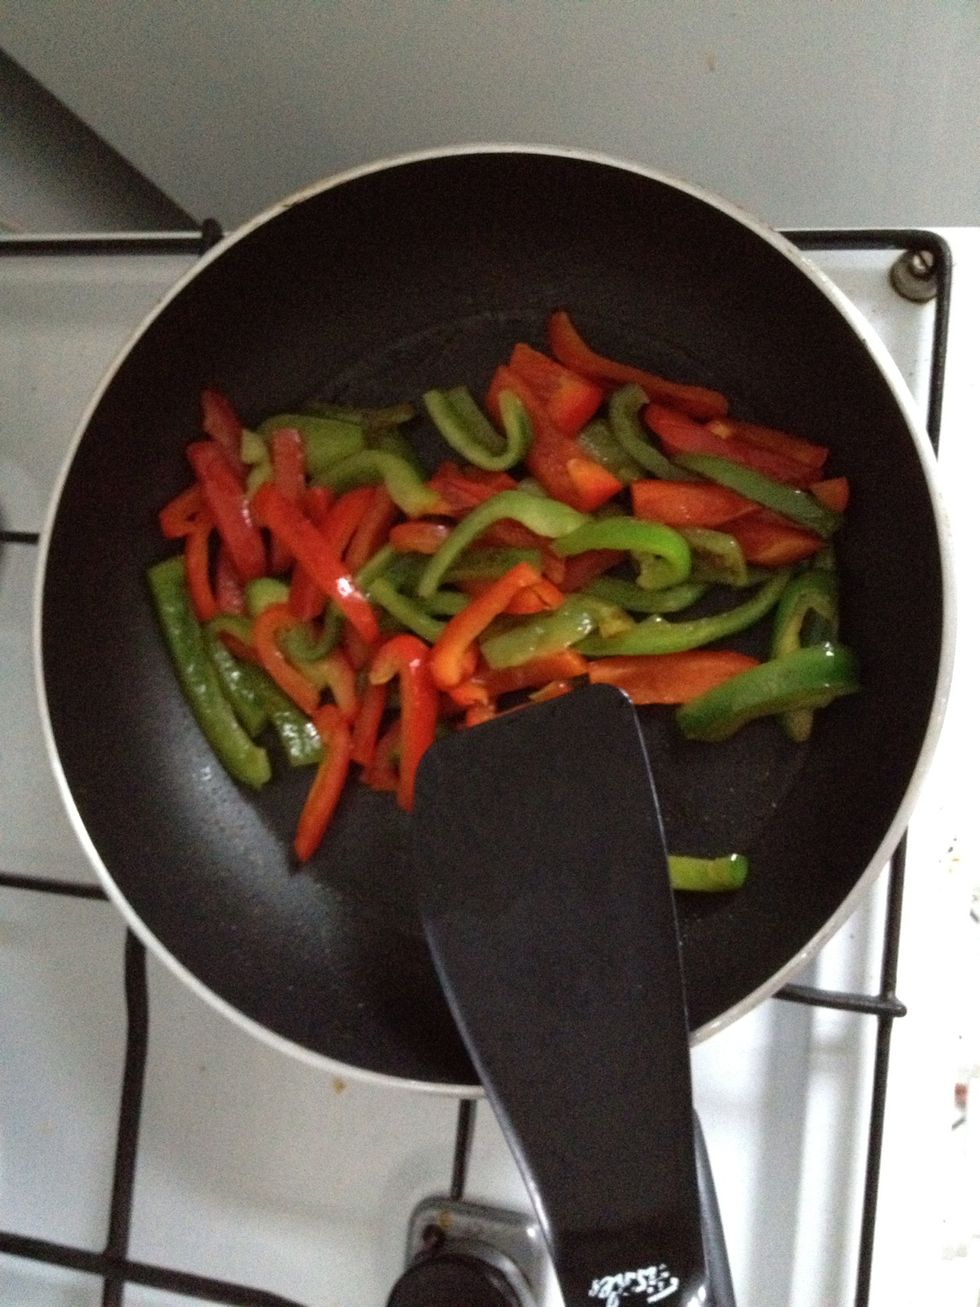 Slice and fry bell peppers.